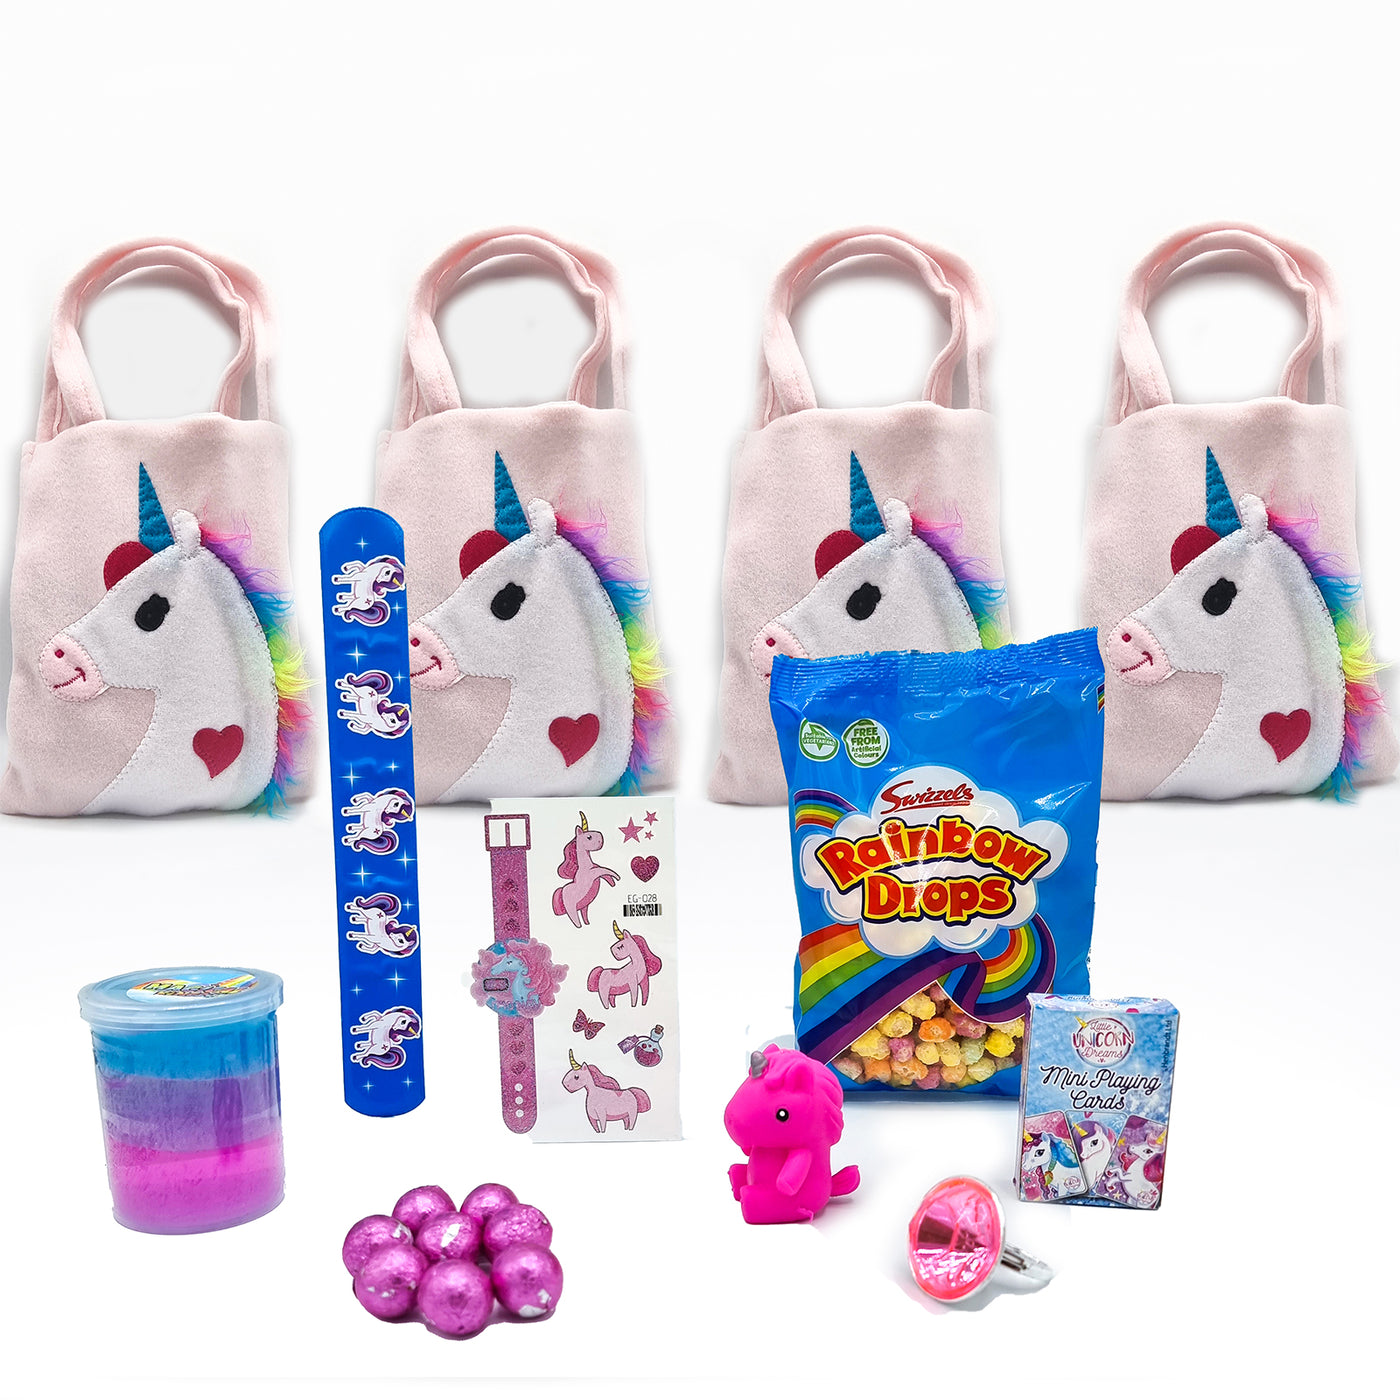 Pre Filled Rainbow Unicorn Party Bags With Toys And Sweets.